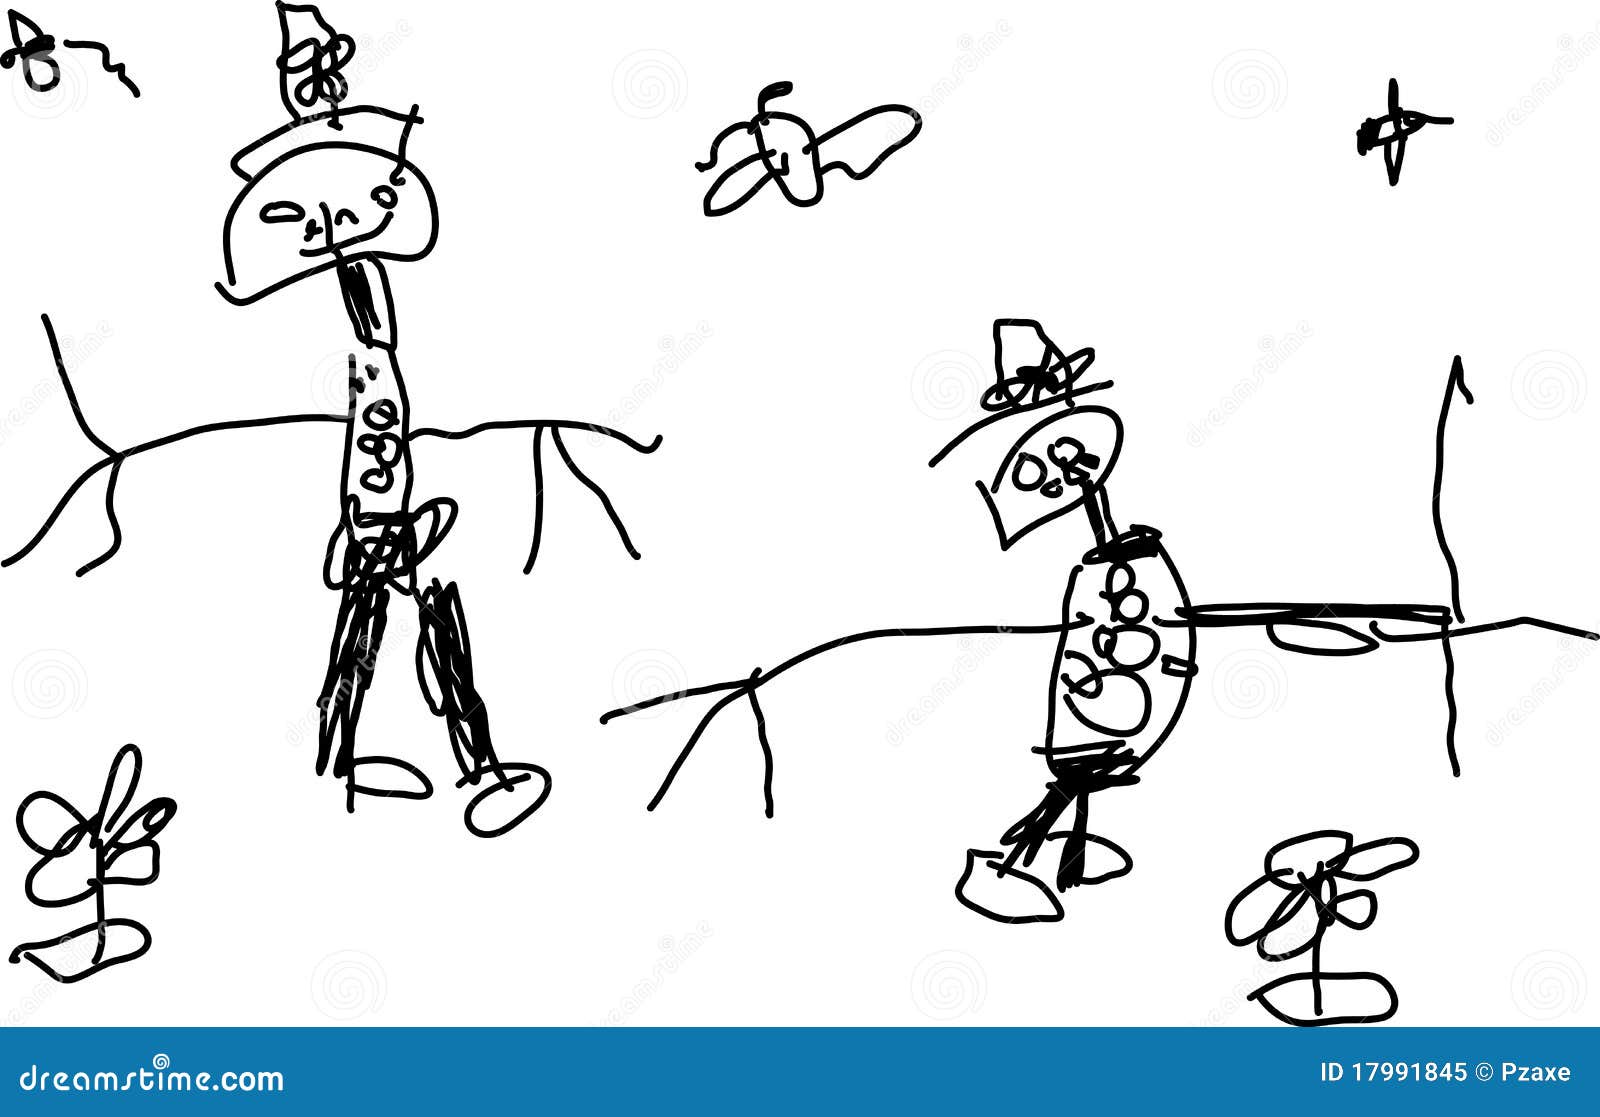 Image result for kid drawing of two people